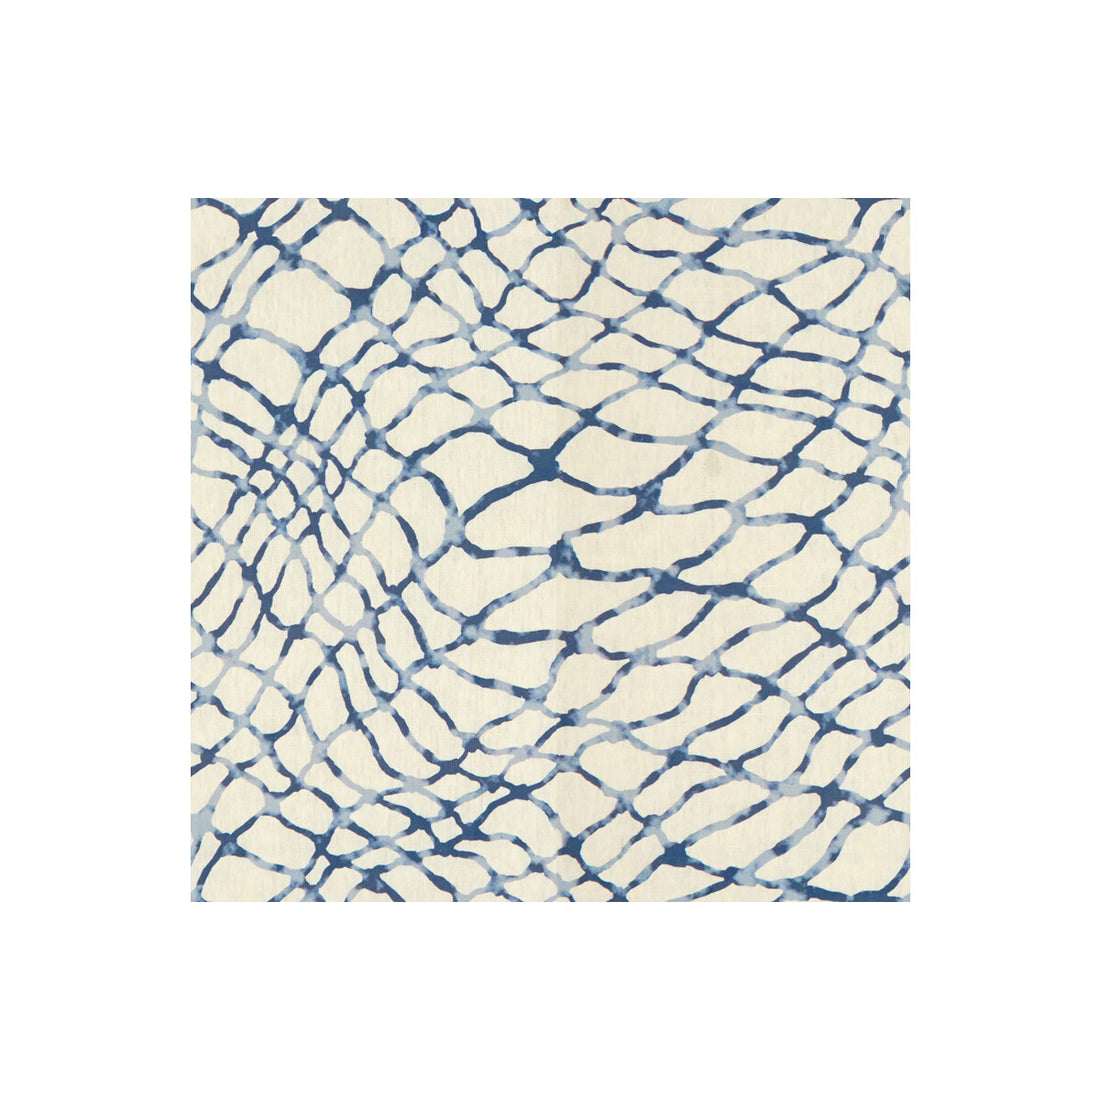 Waterpolo fabric in river color - pattern WATERPOLO.5.0 - by Kravet Basics in the Jeffrey Alan Marks Waterside collection